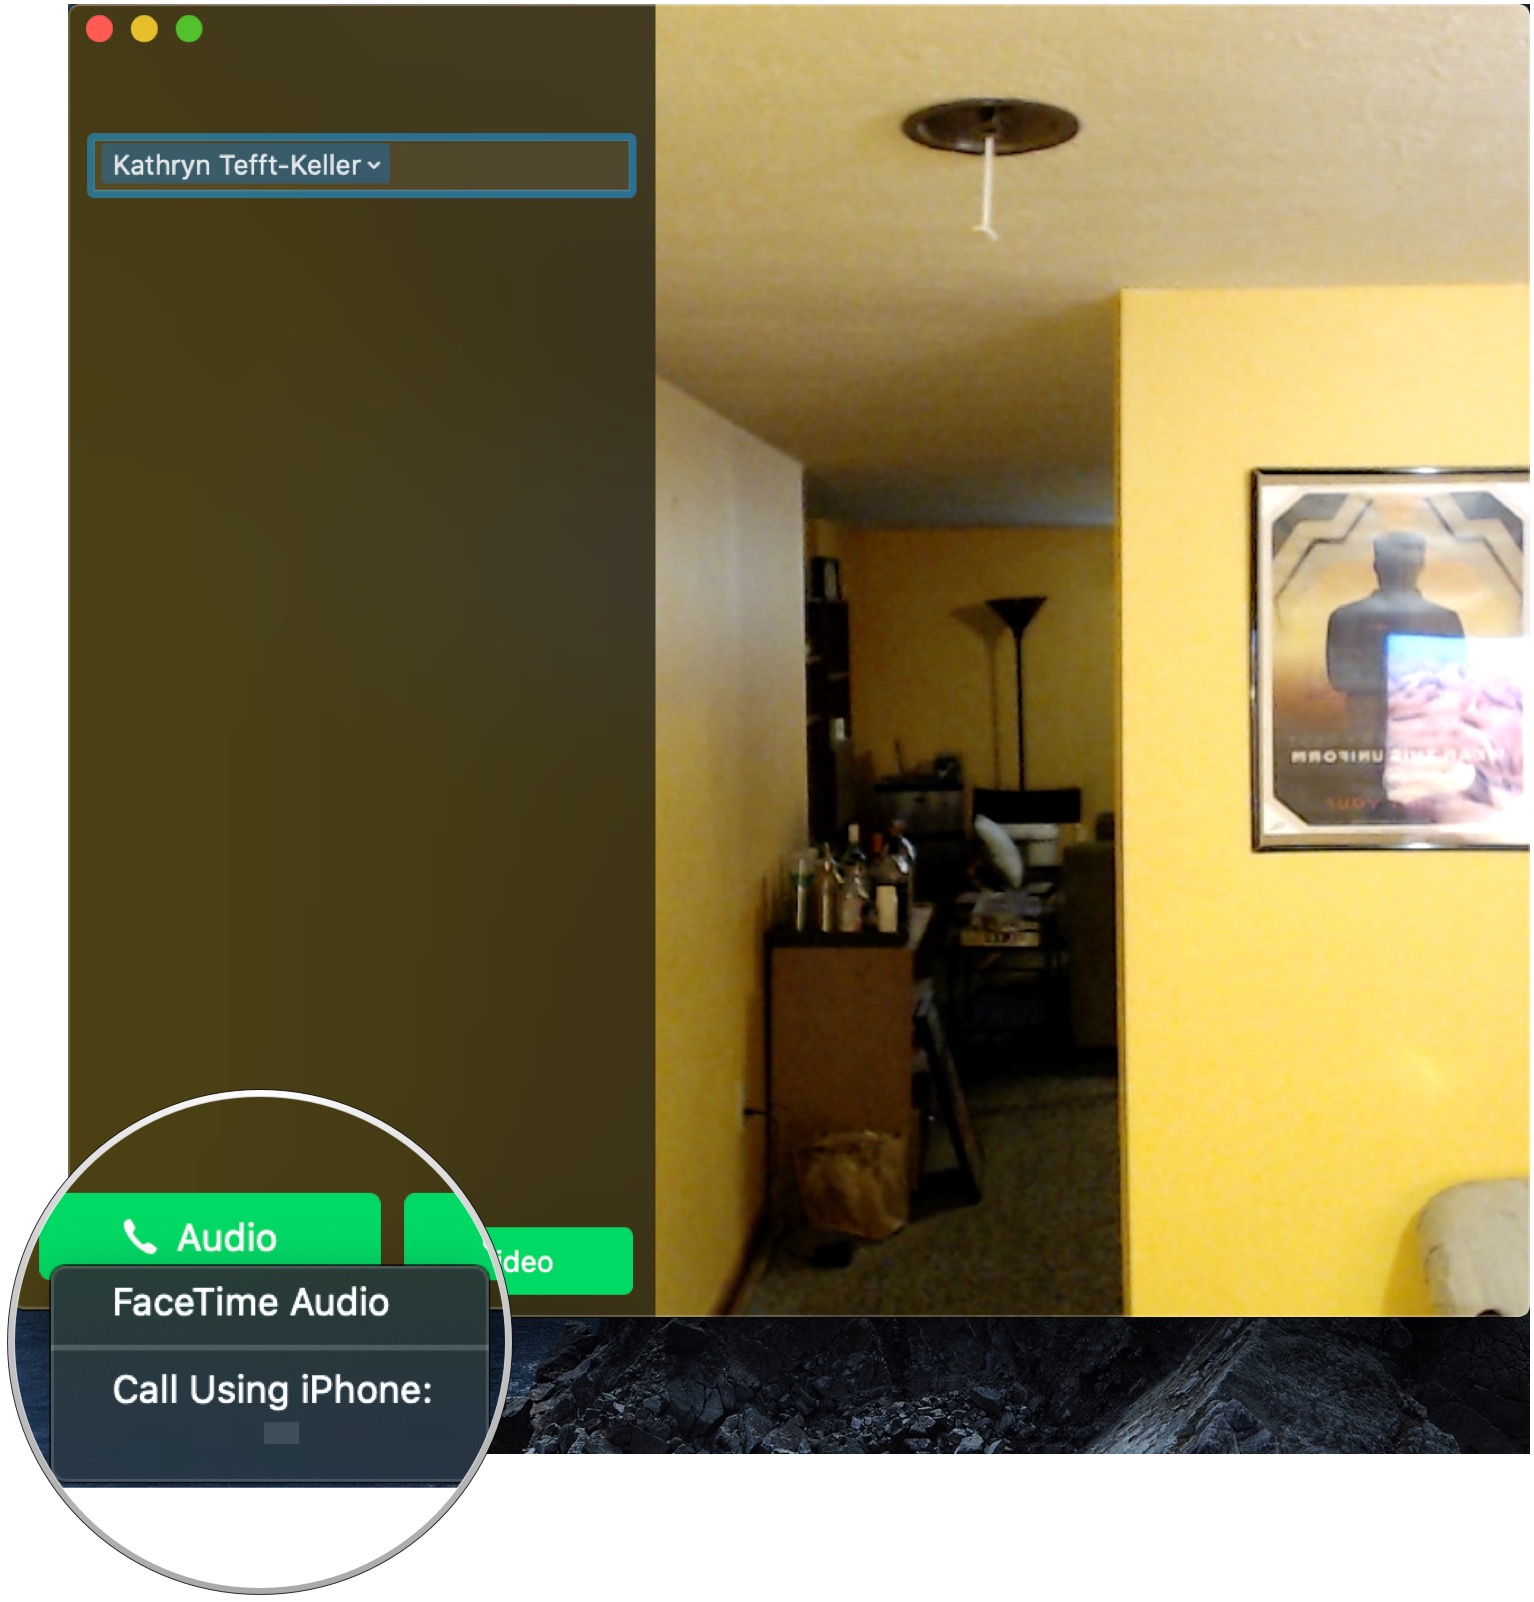 Place a FaceTime Call, showing how to click FaceTime audio or your contact's phone number